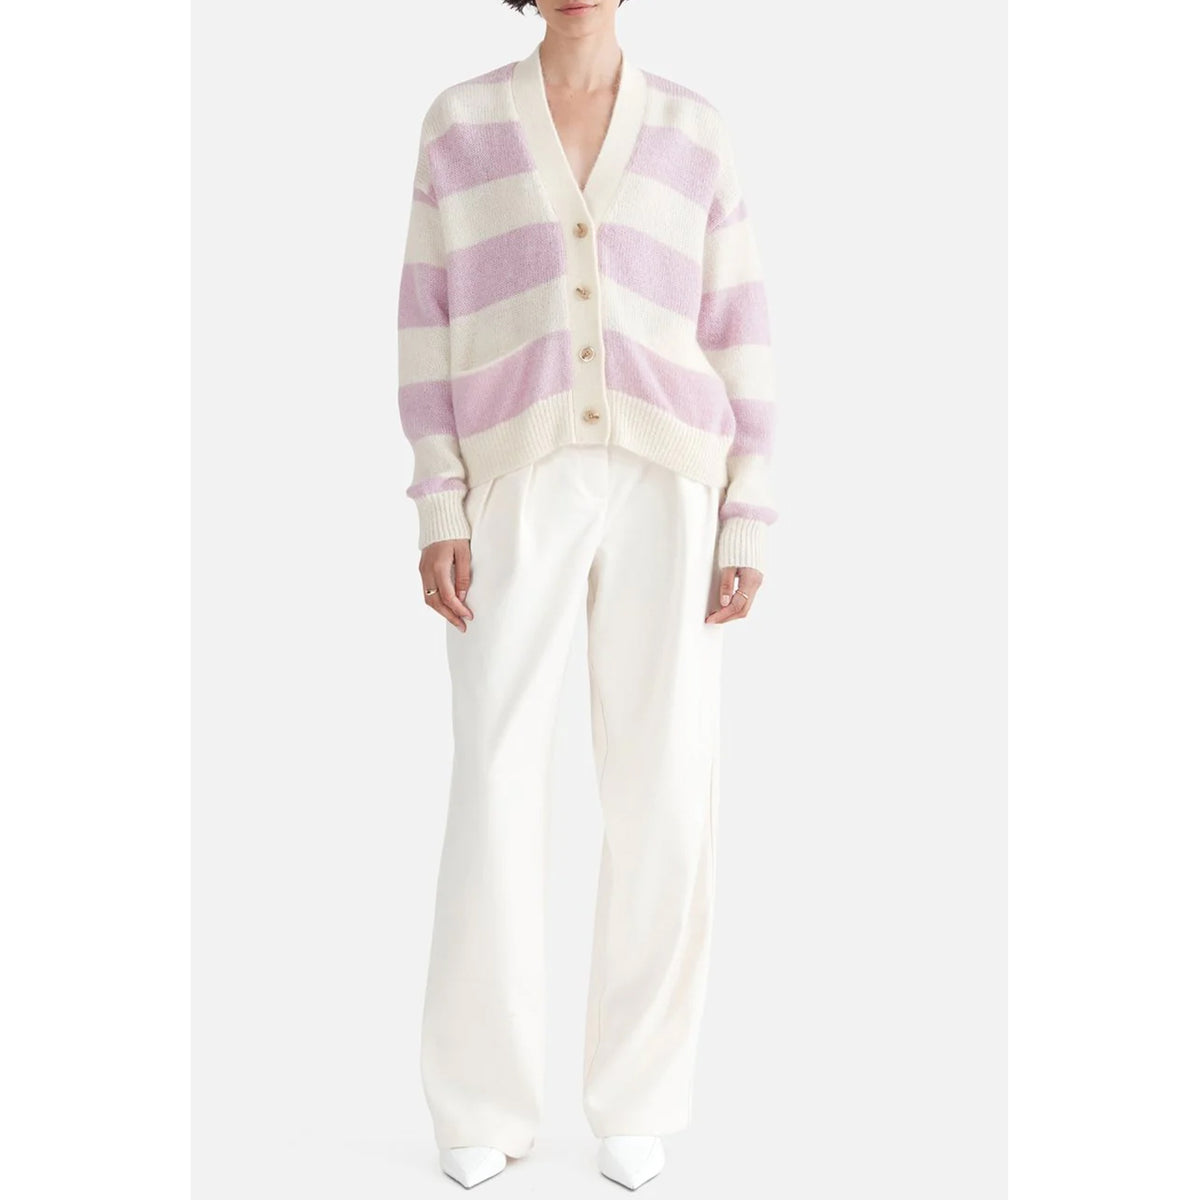 Ena Pelly Lola Knit Cardigan in Vintage White/Orchid